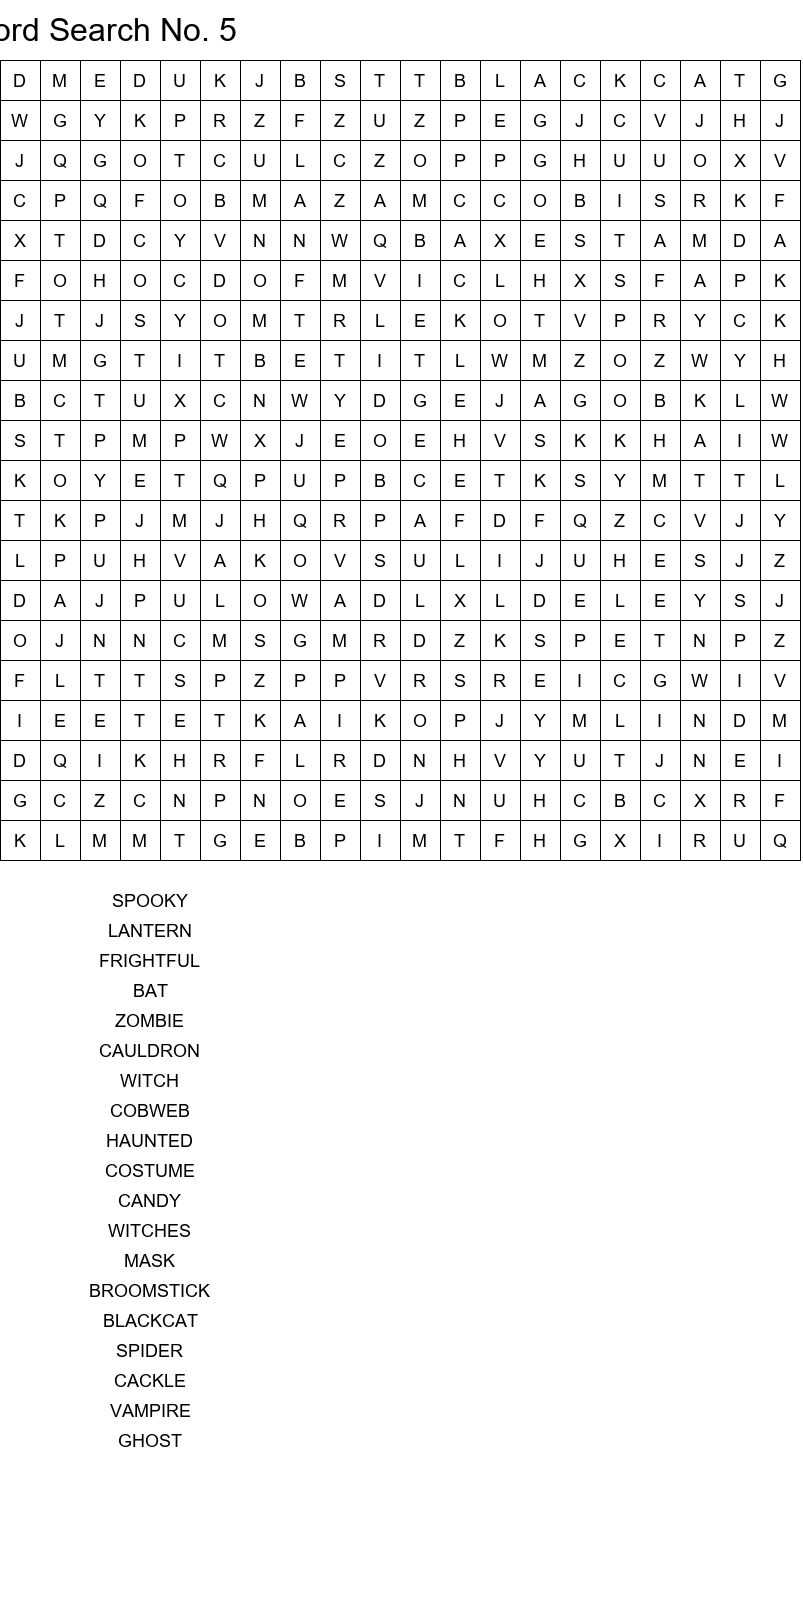 Top 20x20 Halloween word search with answers size 20x20 No 5